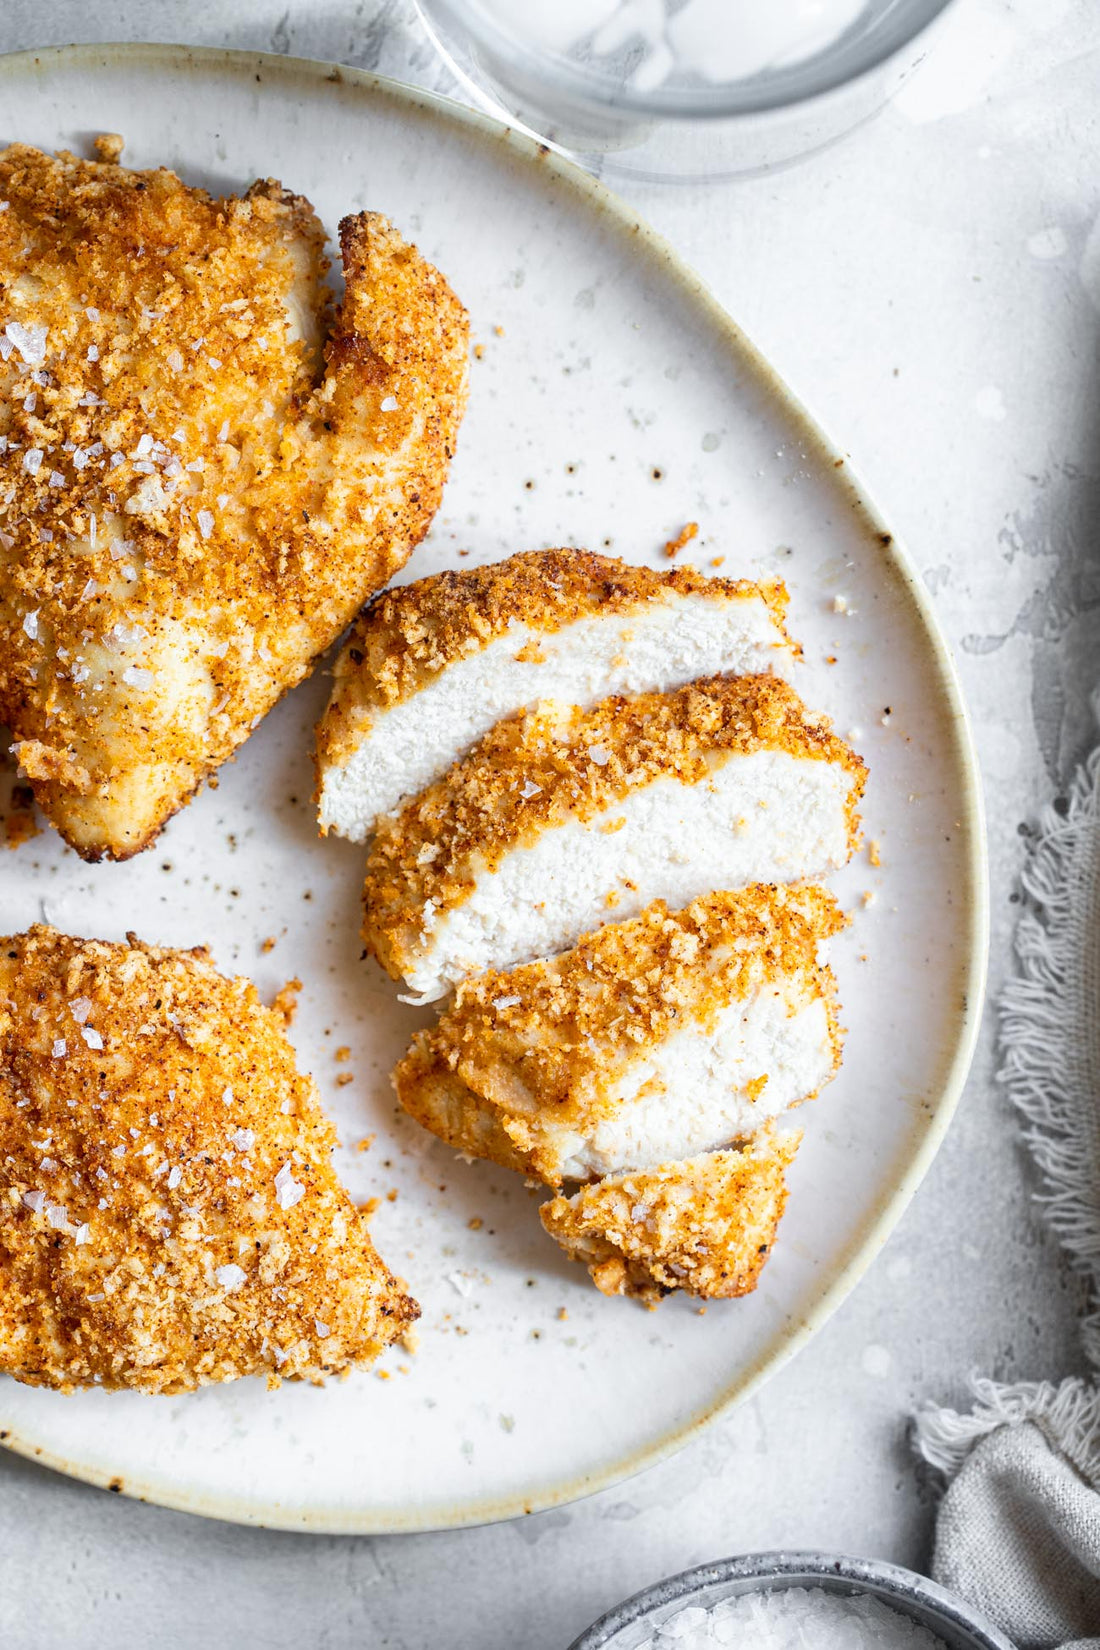 This breaded Air Fryer Chicken Breast is SO crispy you won’t believe how healthy and easy it is! Great for busy weeknights, with a gluten free option!